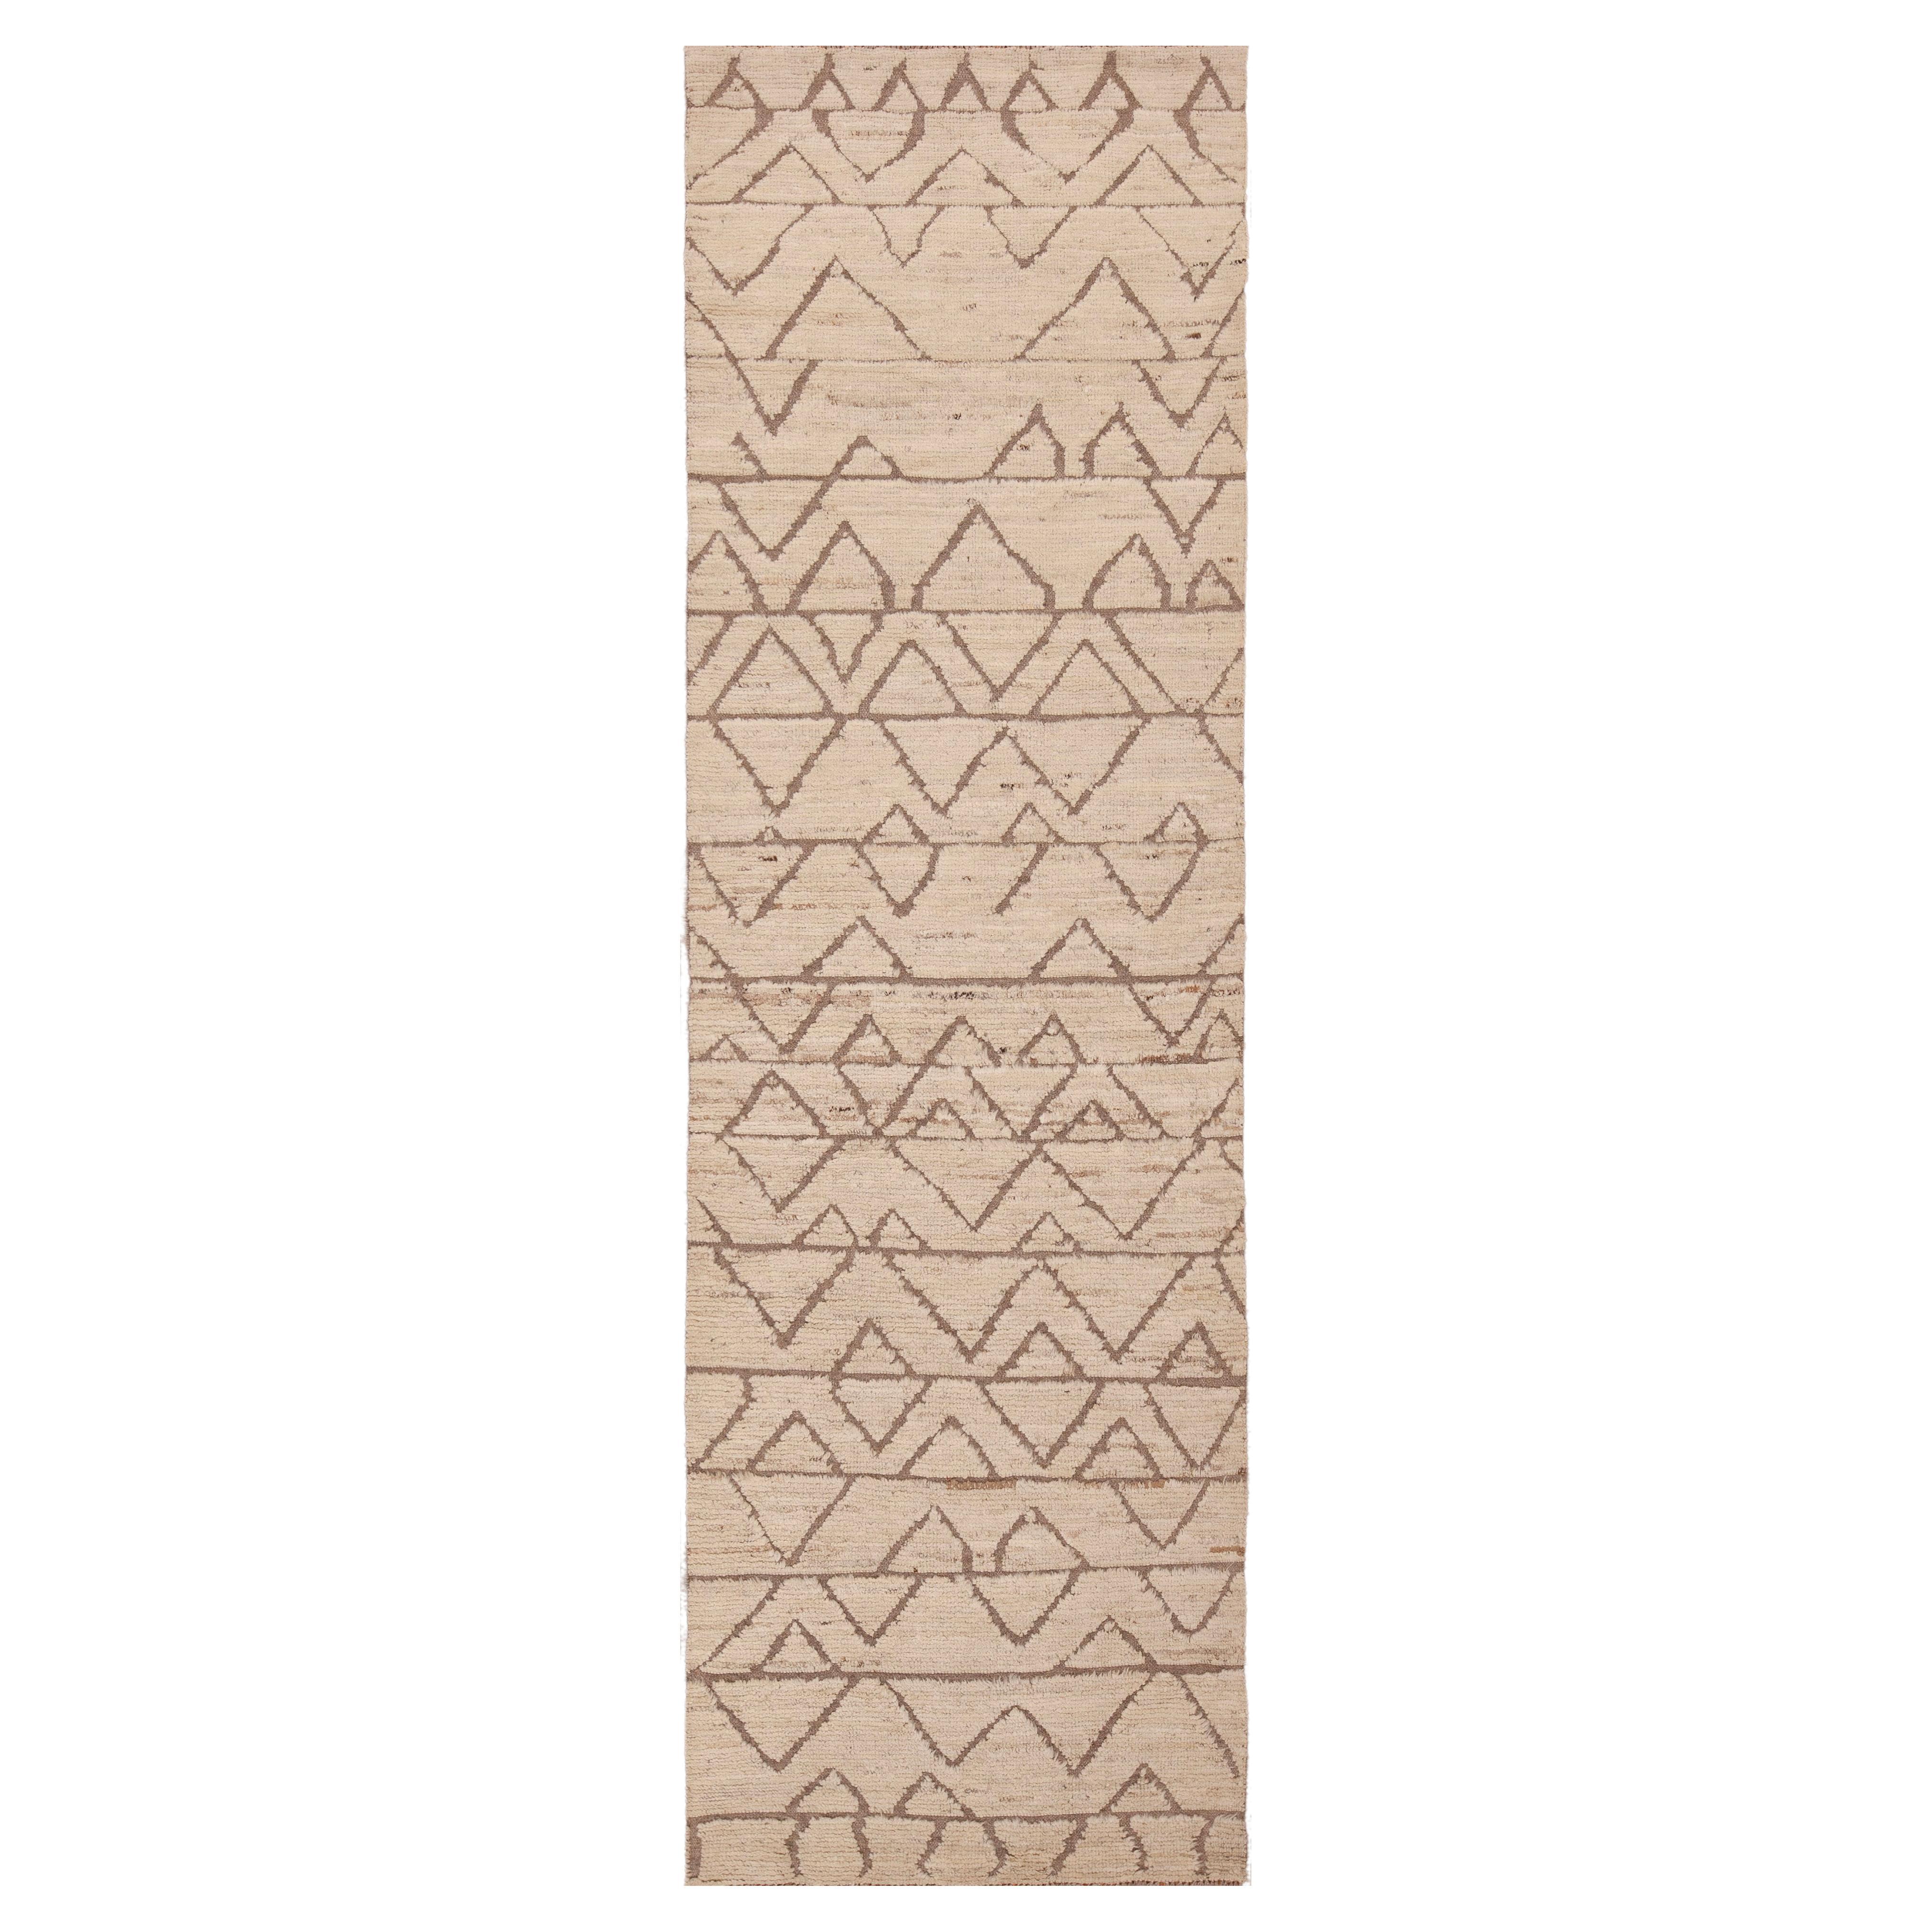 Nazmiyal Collection Ivory Neutral Geometric Tribal Modern Runner Rug 3' x 9'6" For Sale